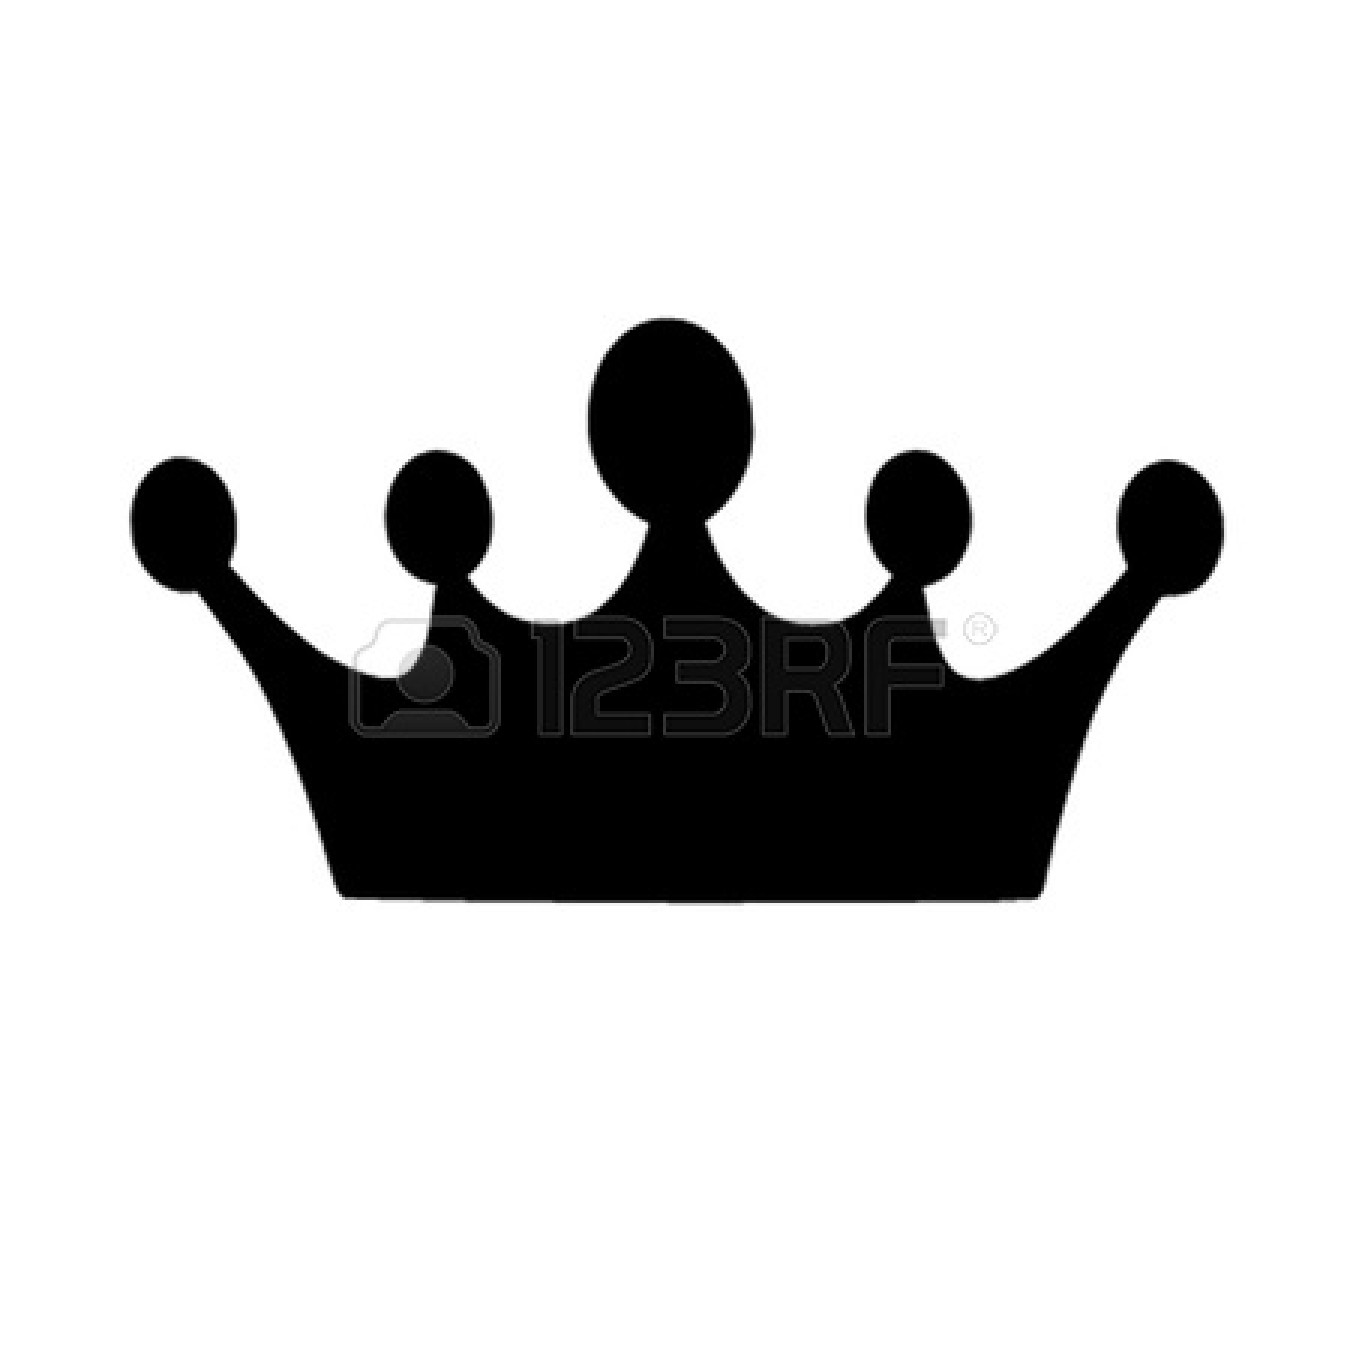 Crown Clip Art With Transparent Background | Clipart Panda - Free ...